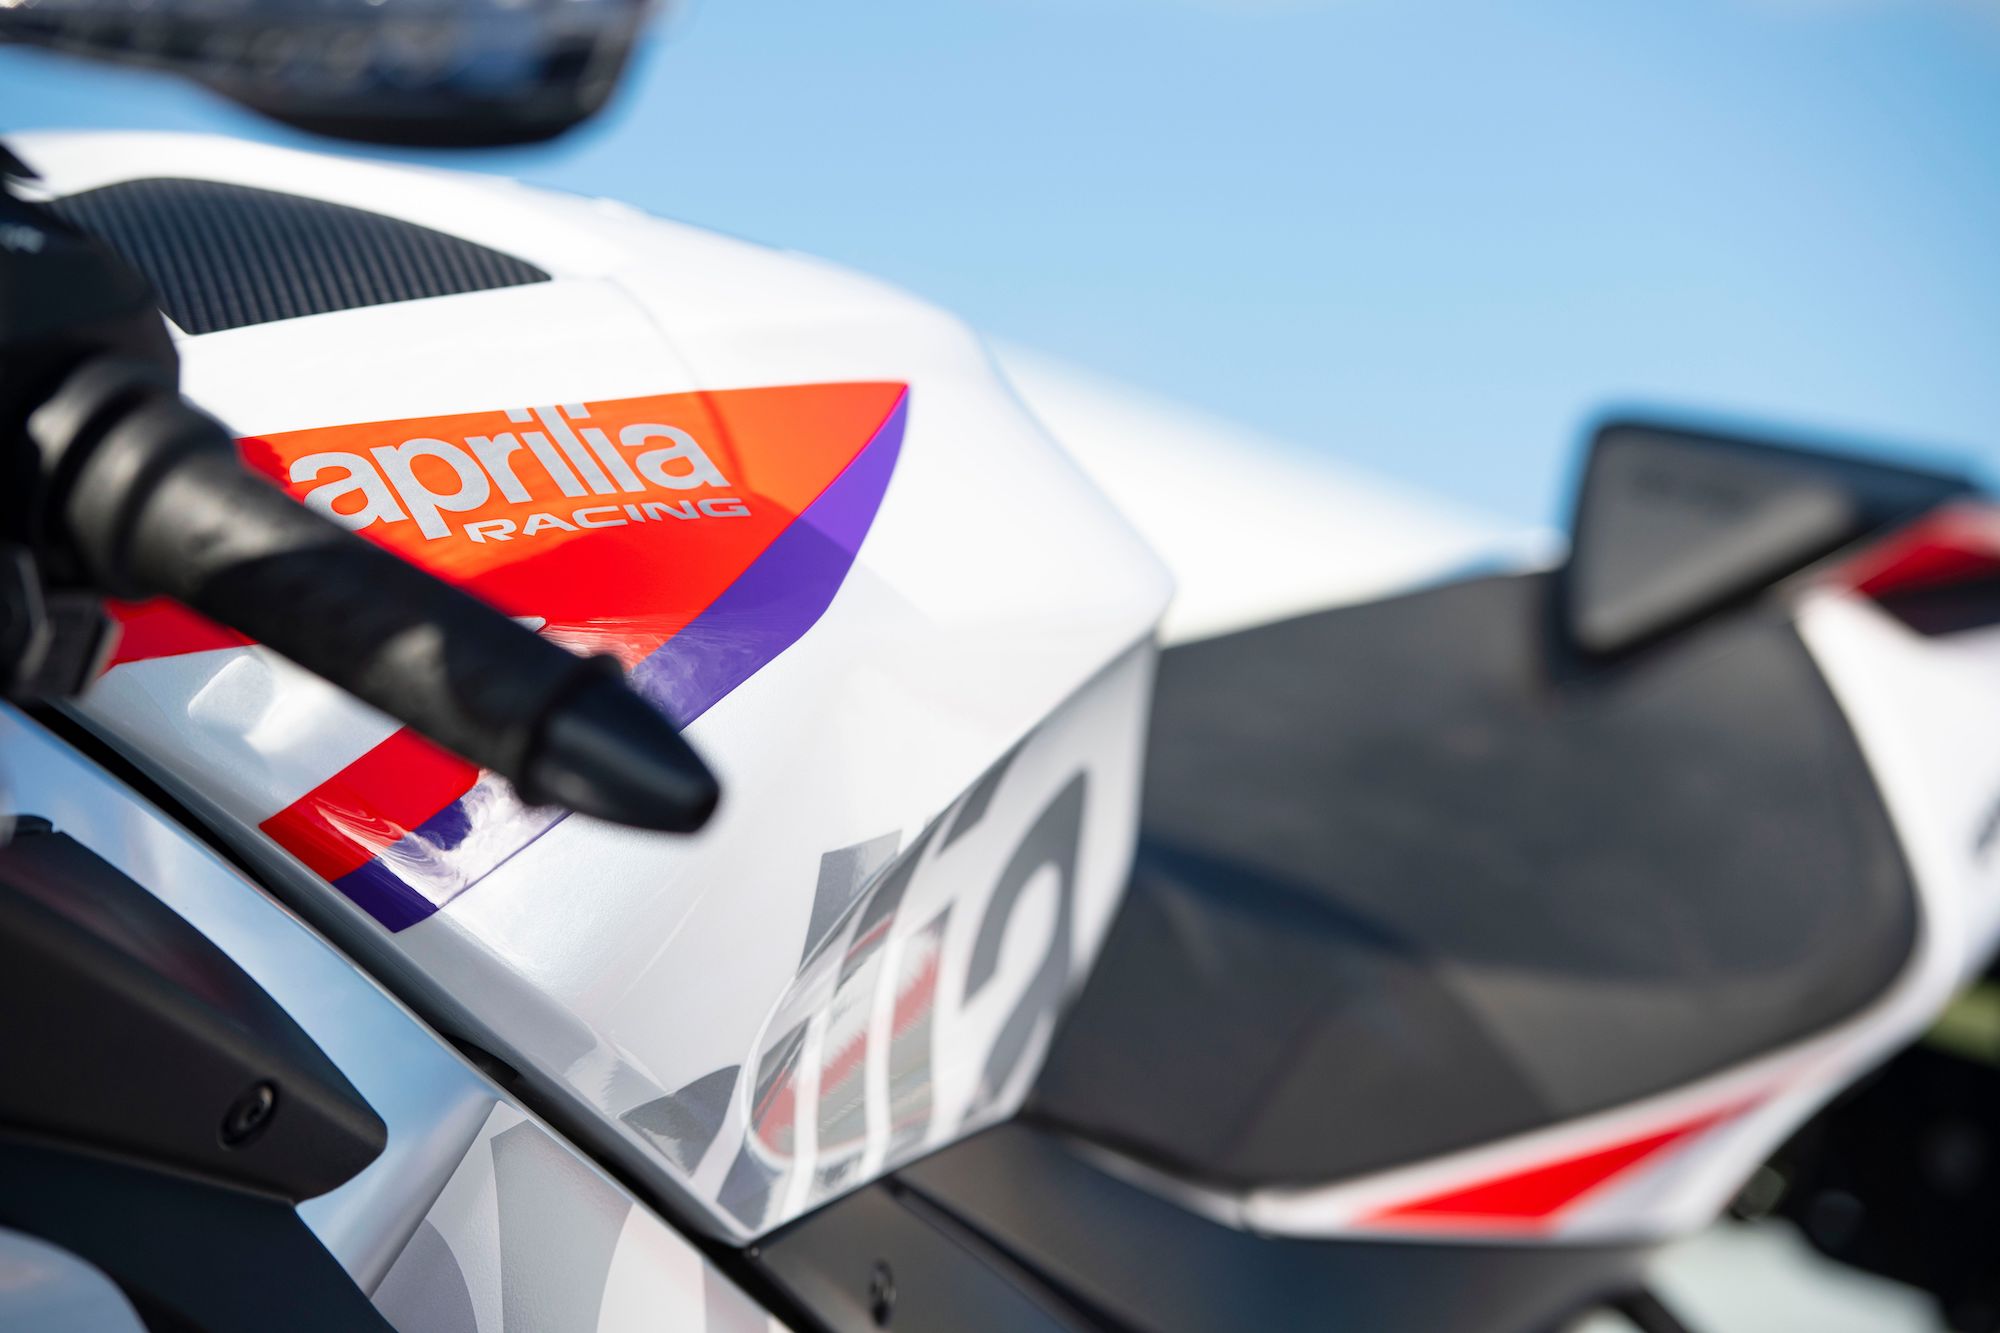 Aprilia's all-new RSV4 Factory and Tuono V4 Factory - two limited edition bikes that broke cover this past weekend. Media sourced from Aprilia.